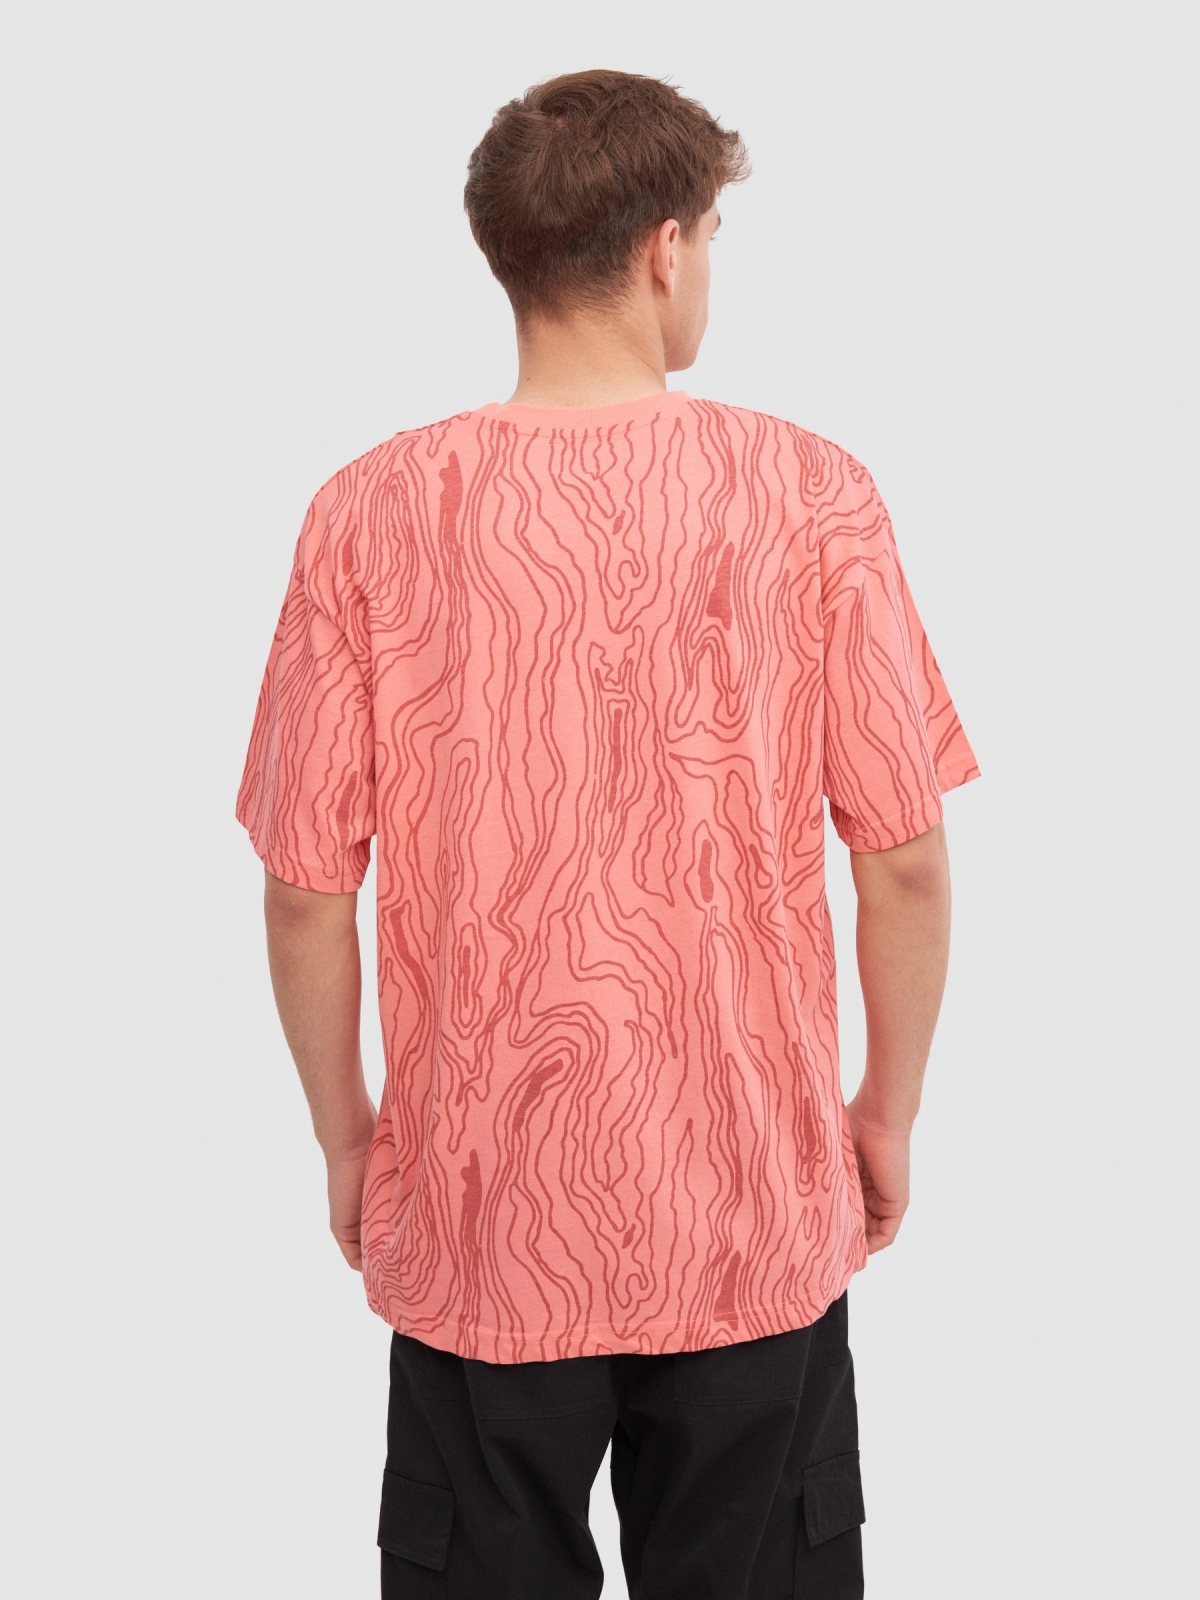 Allover waves t-shirt pink middle back view